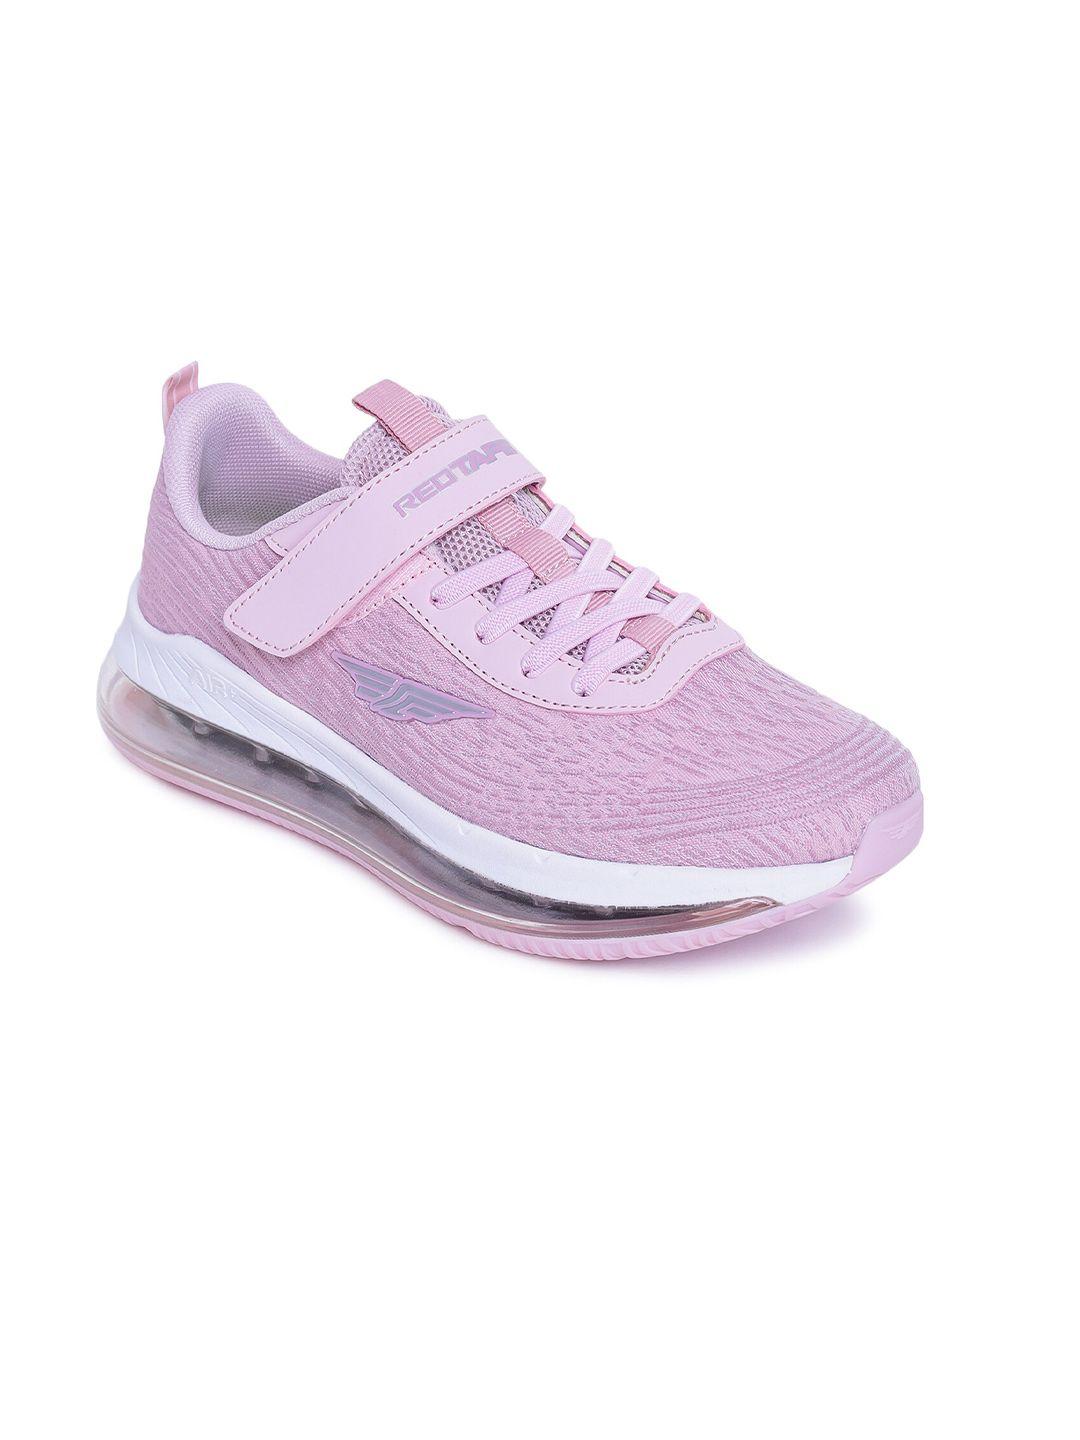 red tape kids pink air + sports shoes